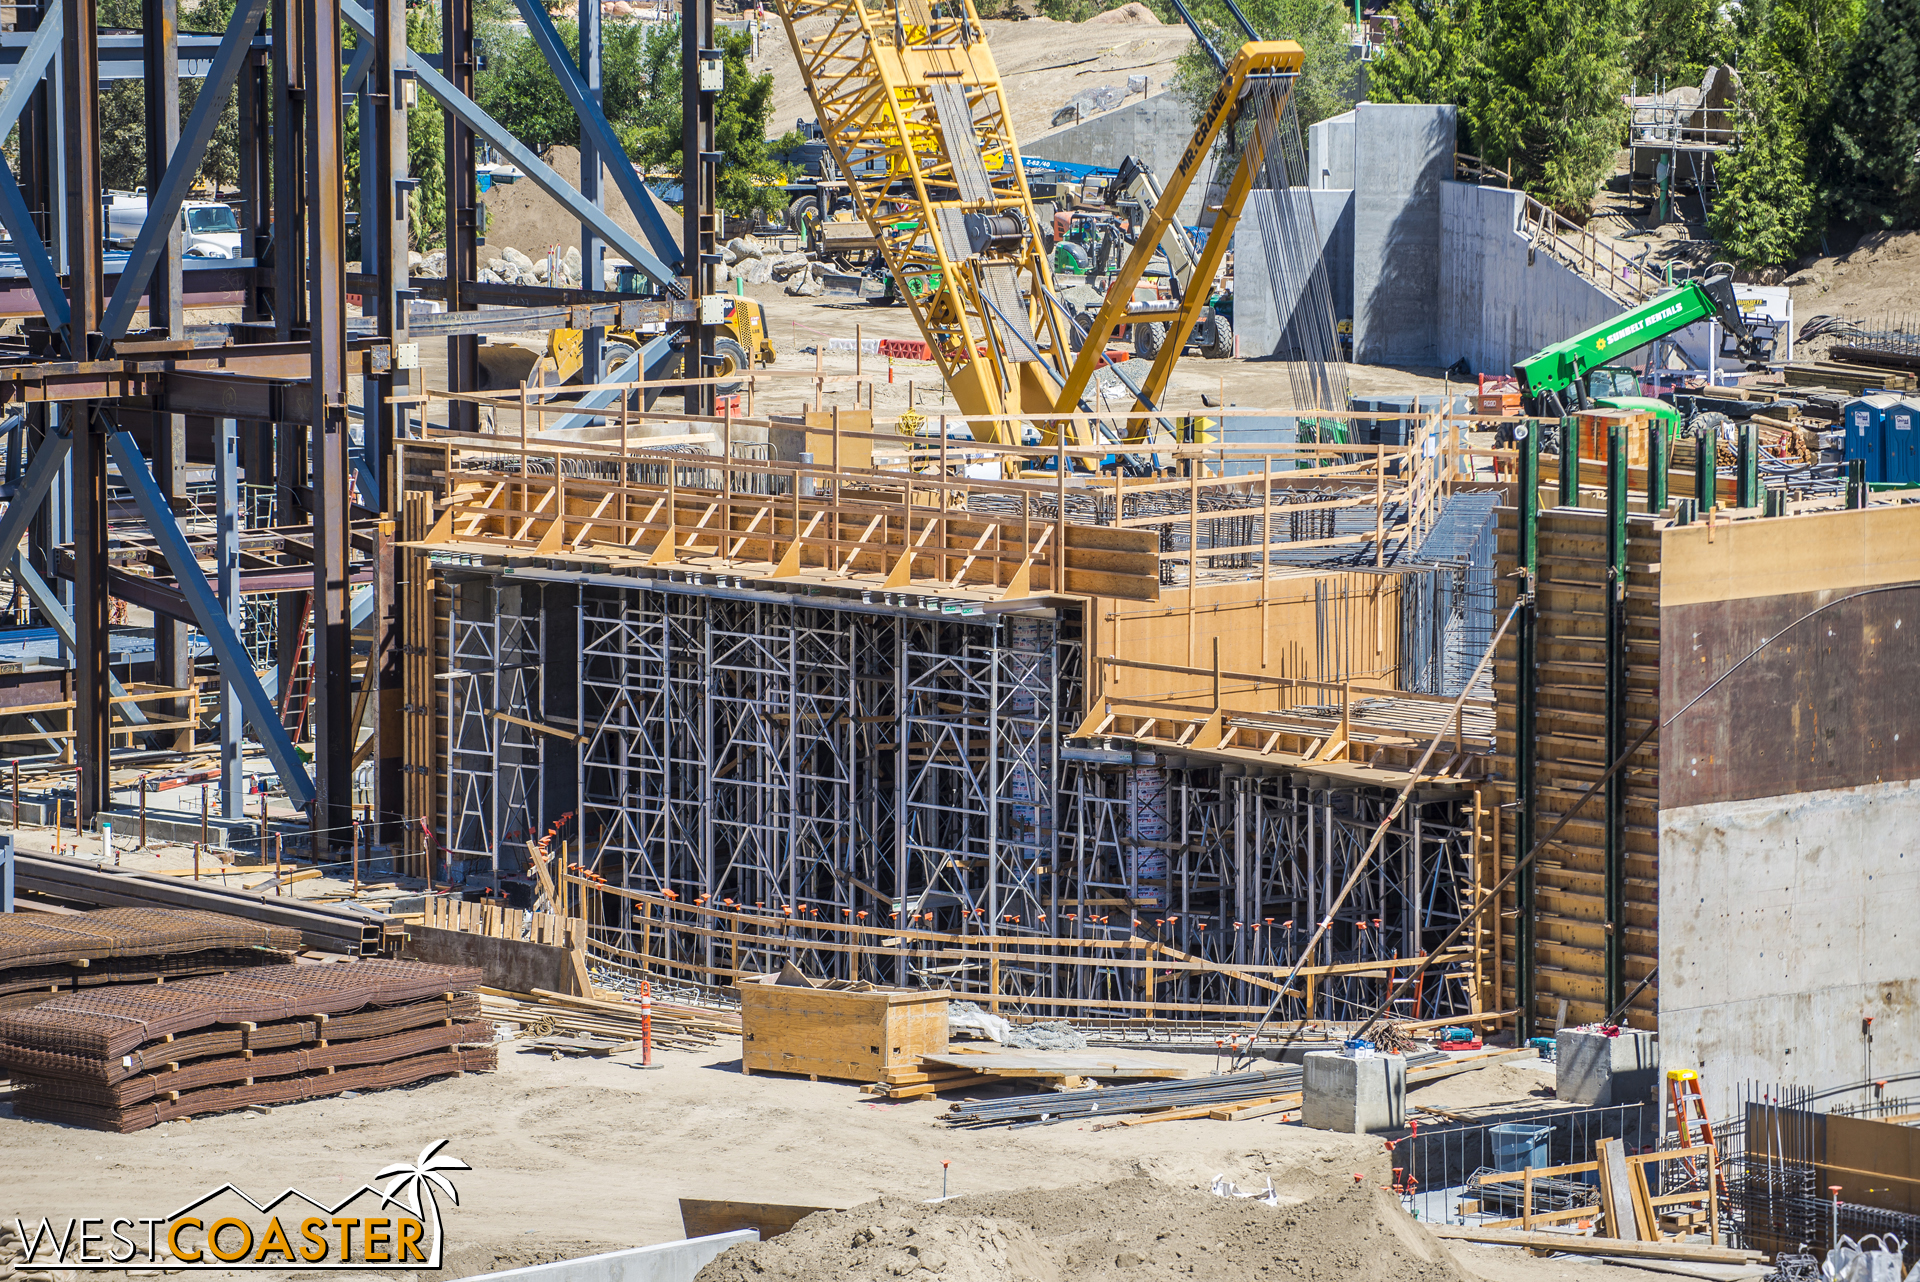  They continue to cast more concrete around steel reinforcement and formwork here, rising out of the ground. 